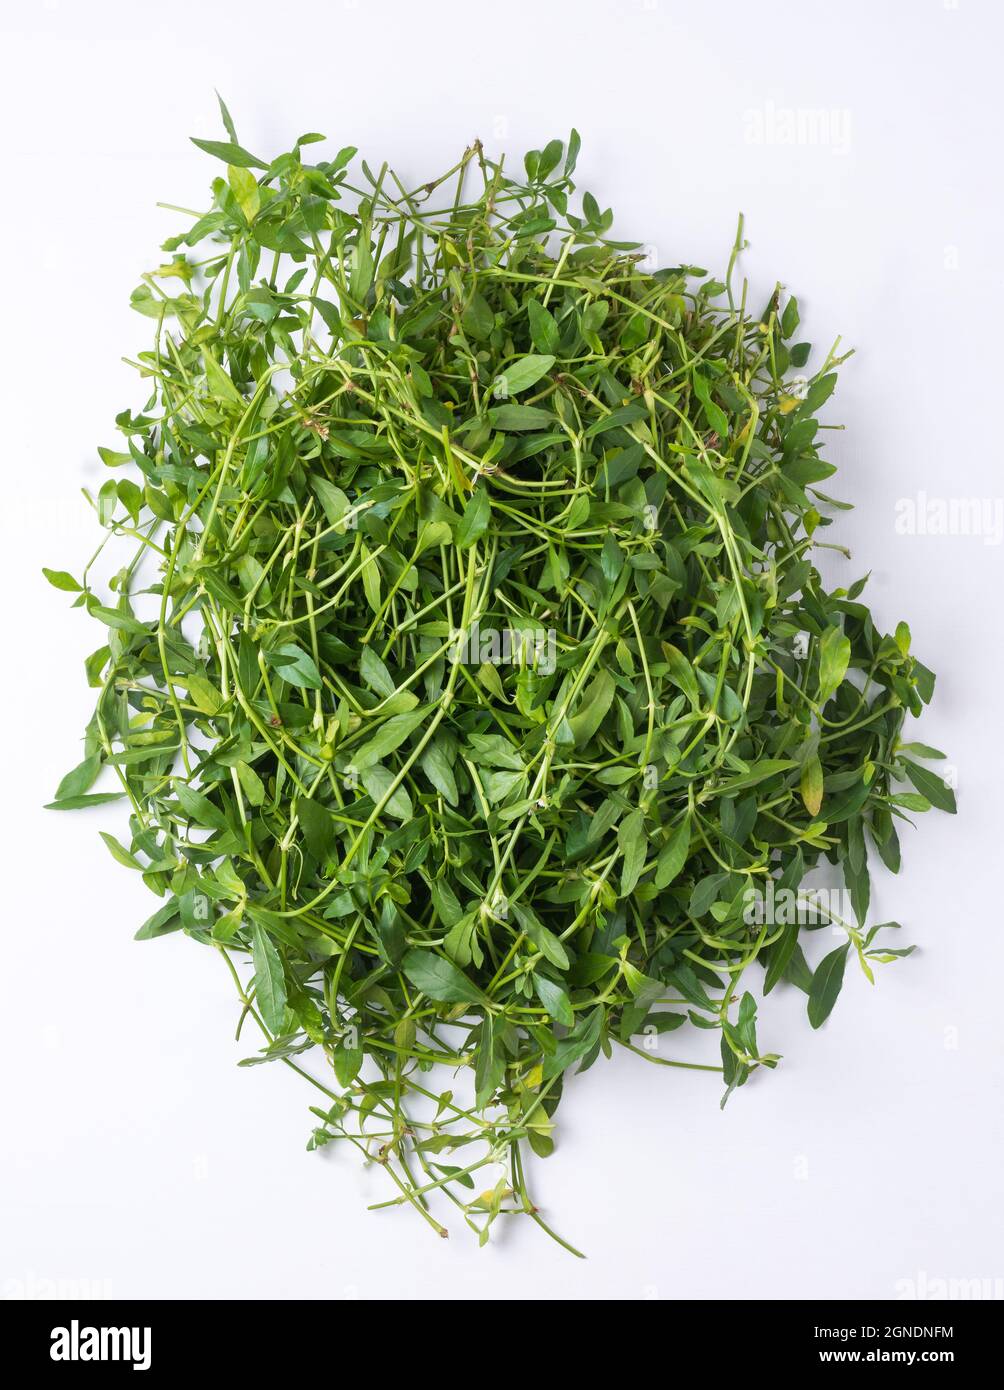 bunch of dwarf copperleaf or sessile joyweed leaves on a white surface, leafy vegetable ready to cook, closeup of herbal plant Stock Photo